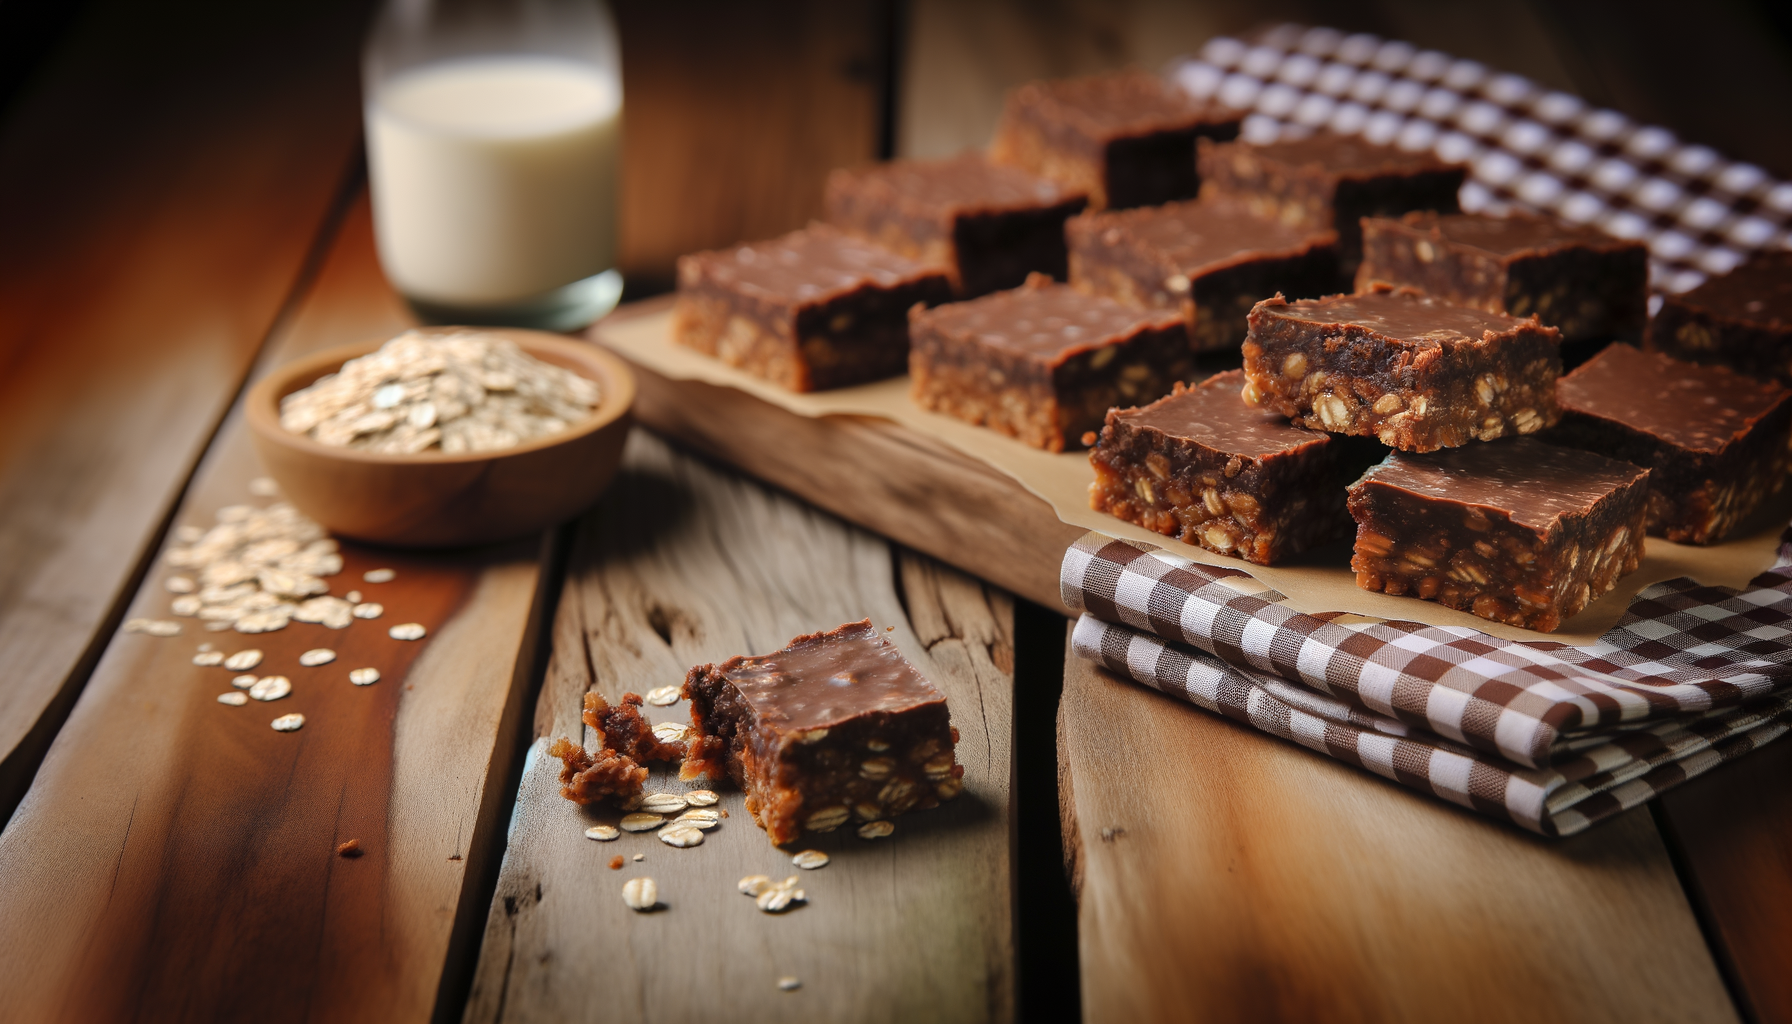 Rustic scene of no bake chocolate oat bars on a wooden table with milk and checkered napkin.